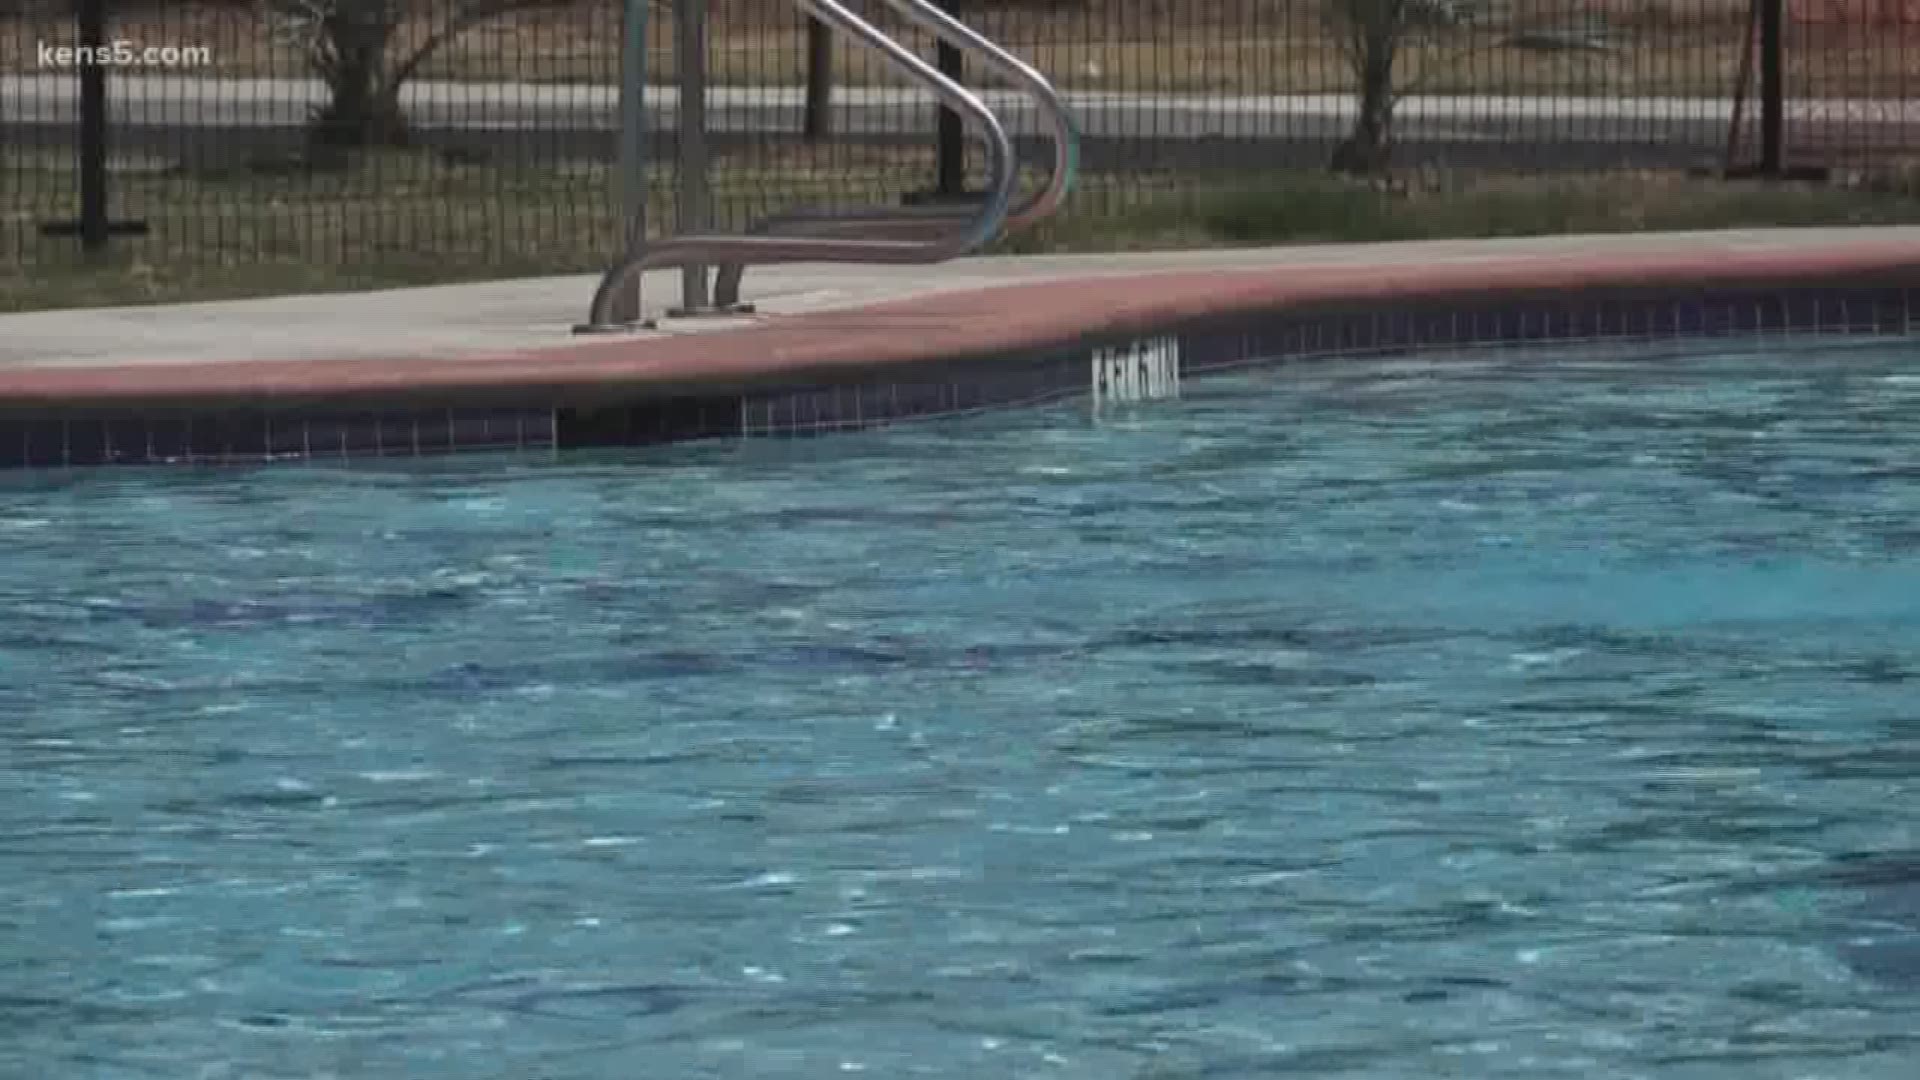 On a hot day, water is your best friend - not just to drink but also to cool down with. San Antonio's Parks and Recreation department are extending pool season to battle the extreme heat in the city.